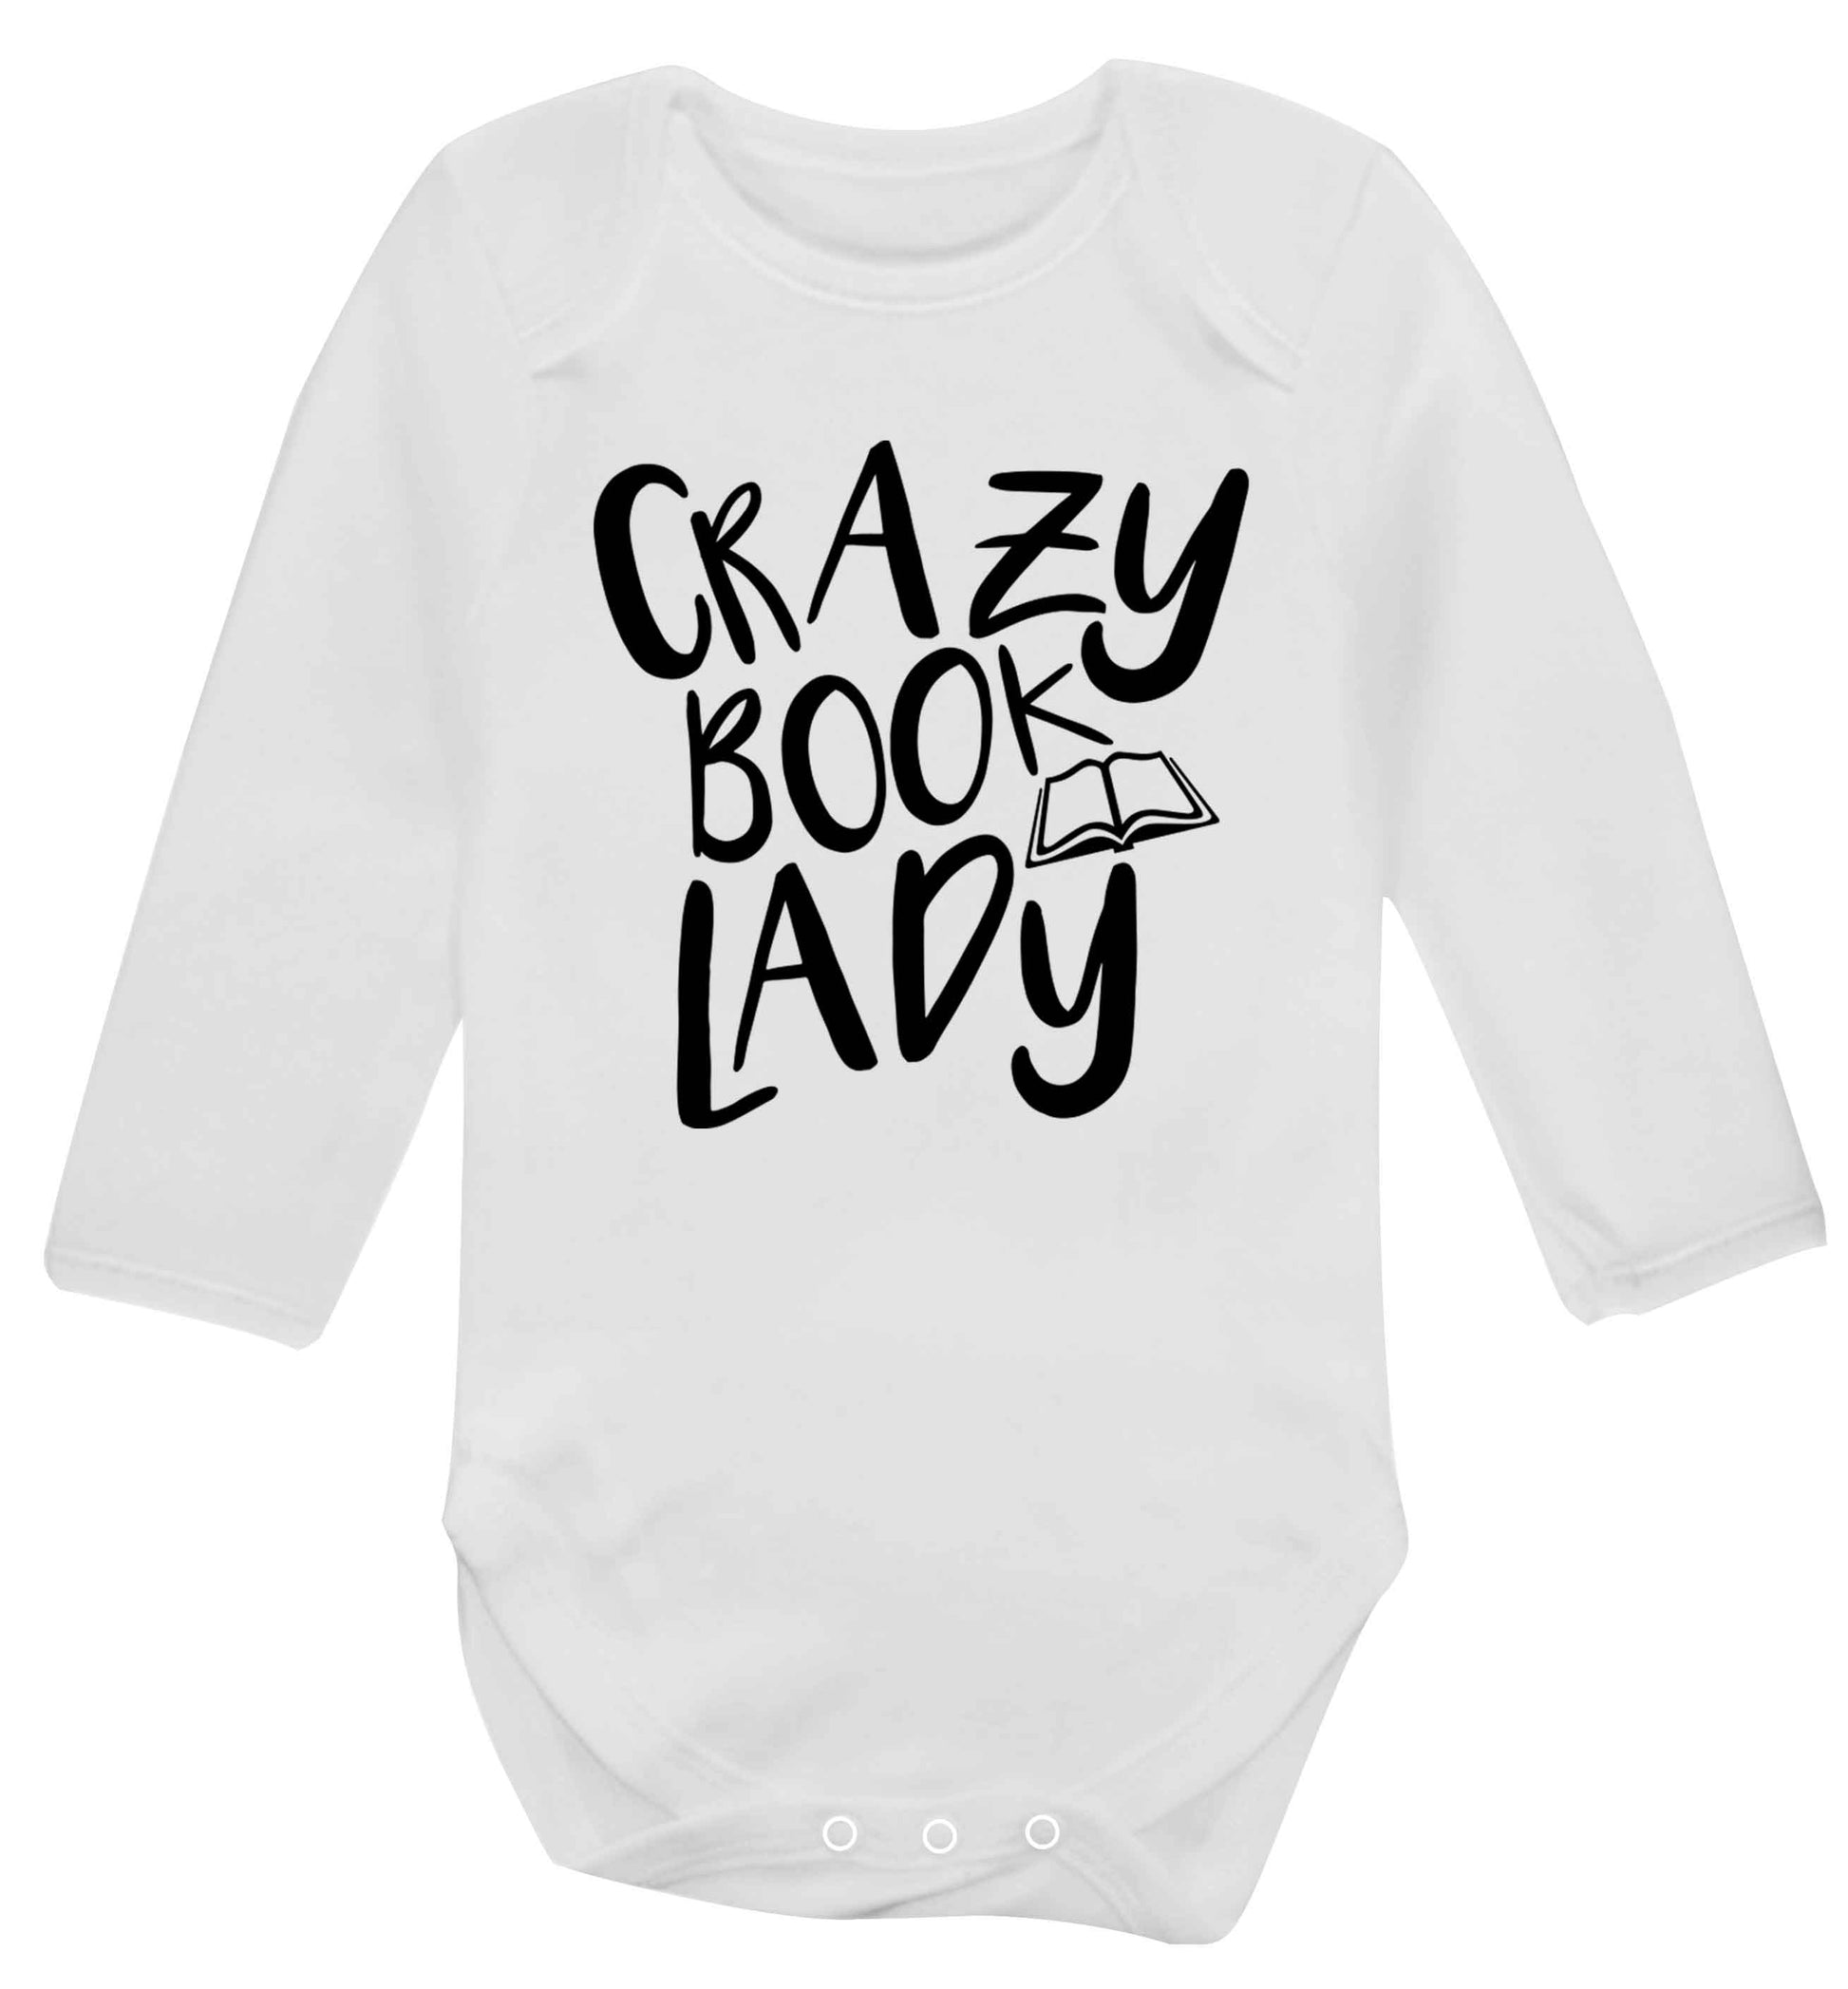 Crazy book lady Baby Vest long sleeved white 6-12 months